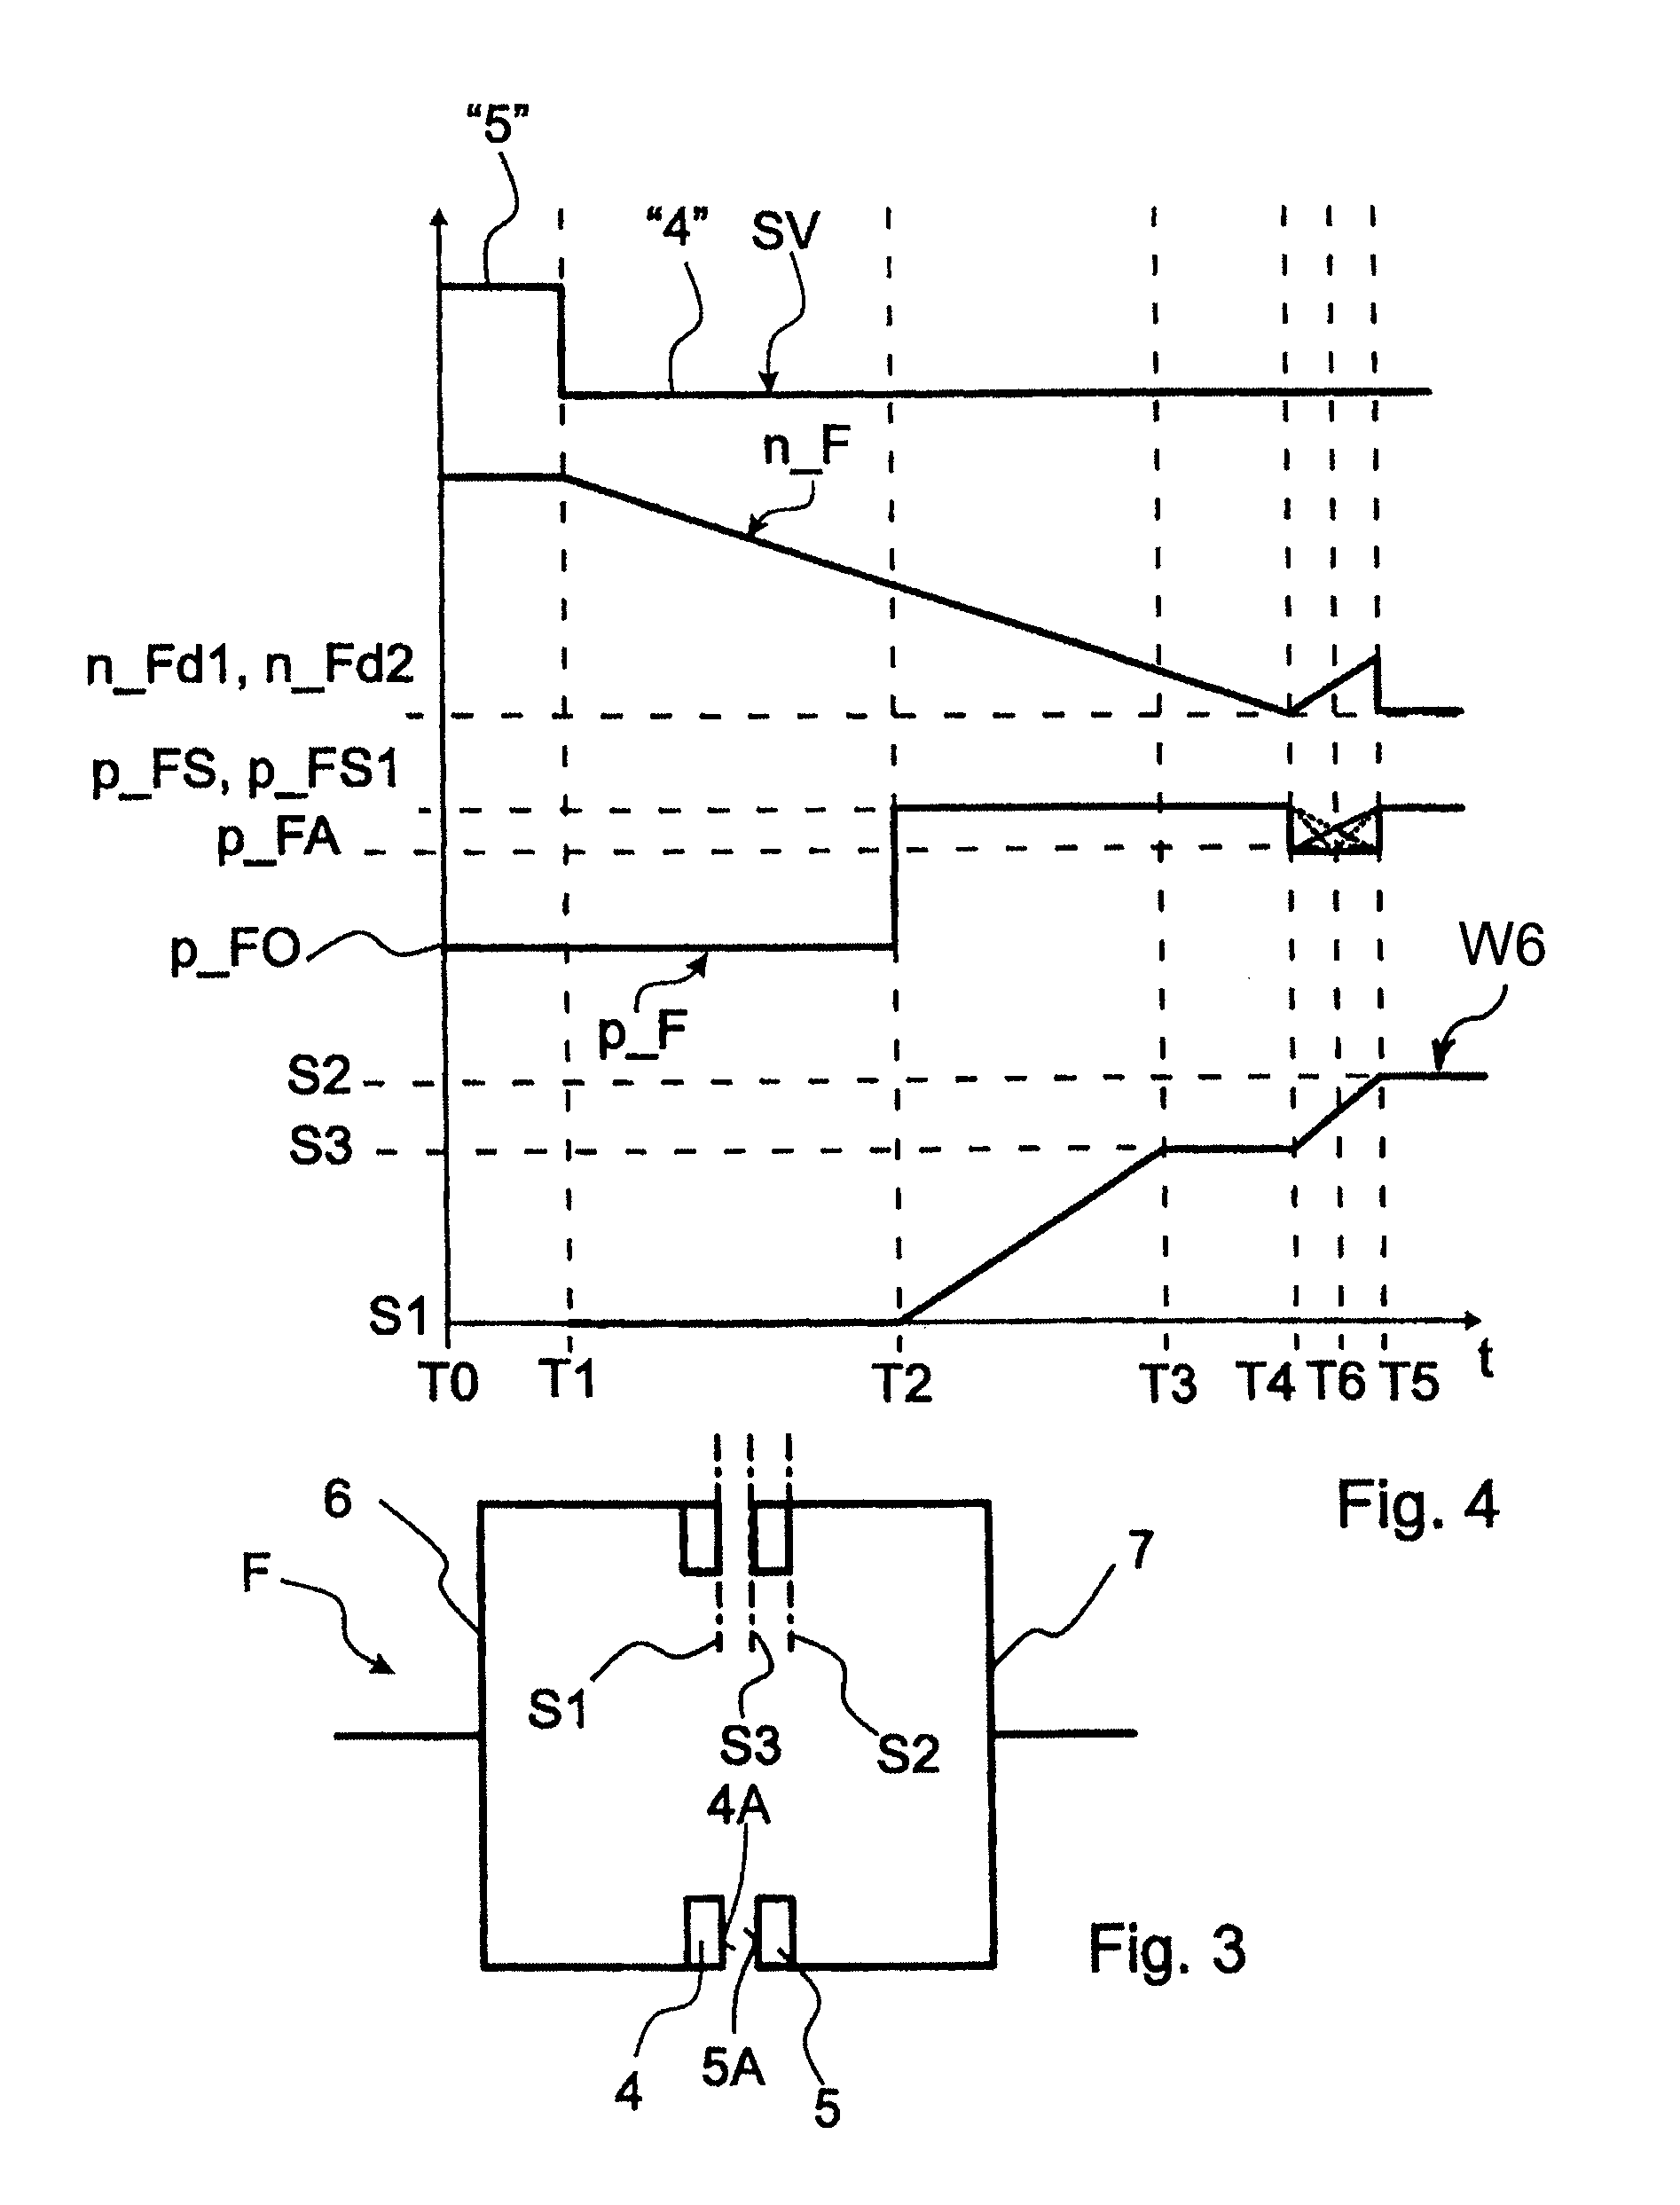 Method for operating a transmission with at least one positive-locking shifting element